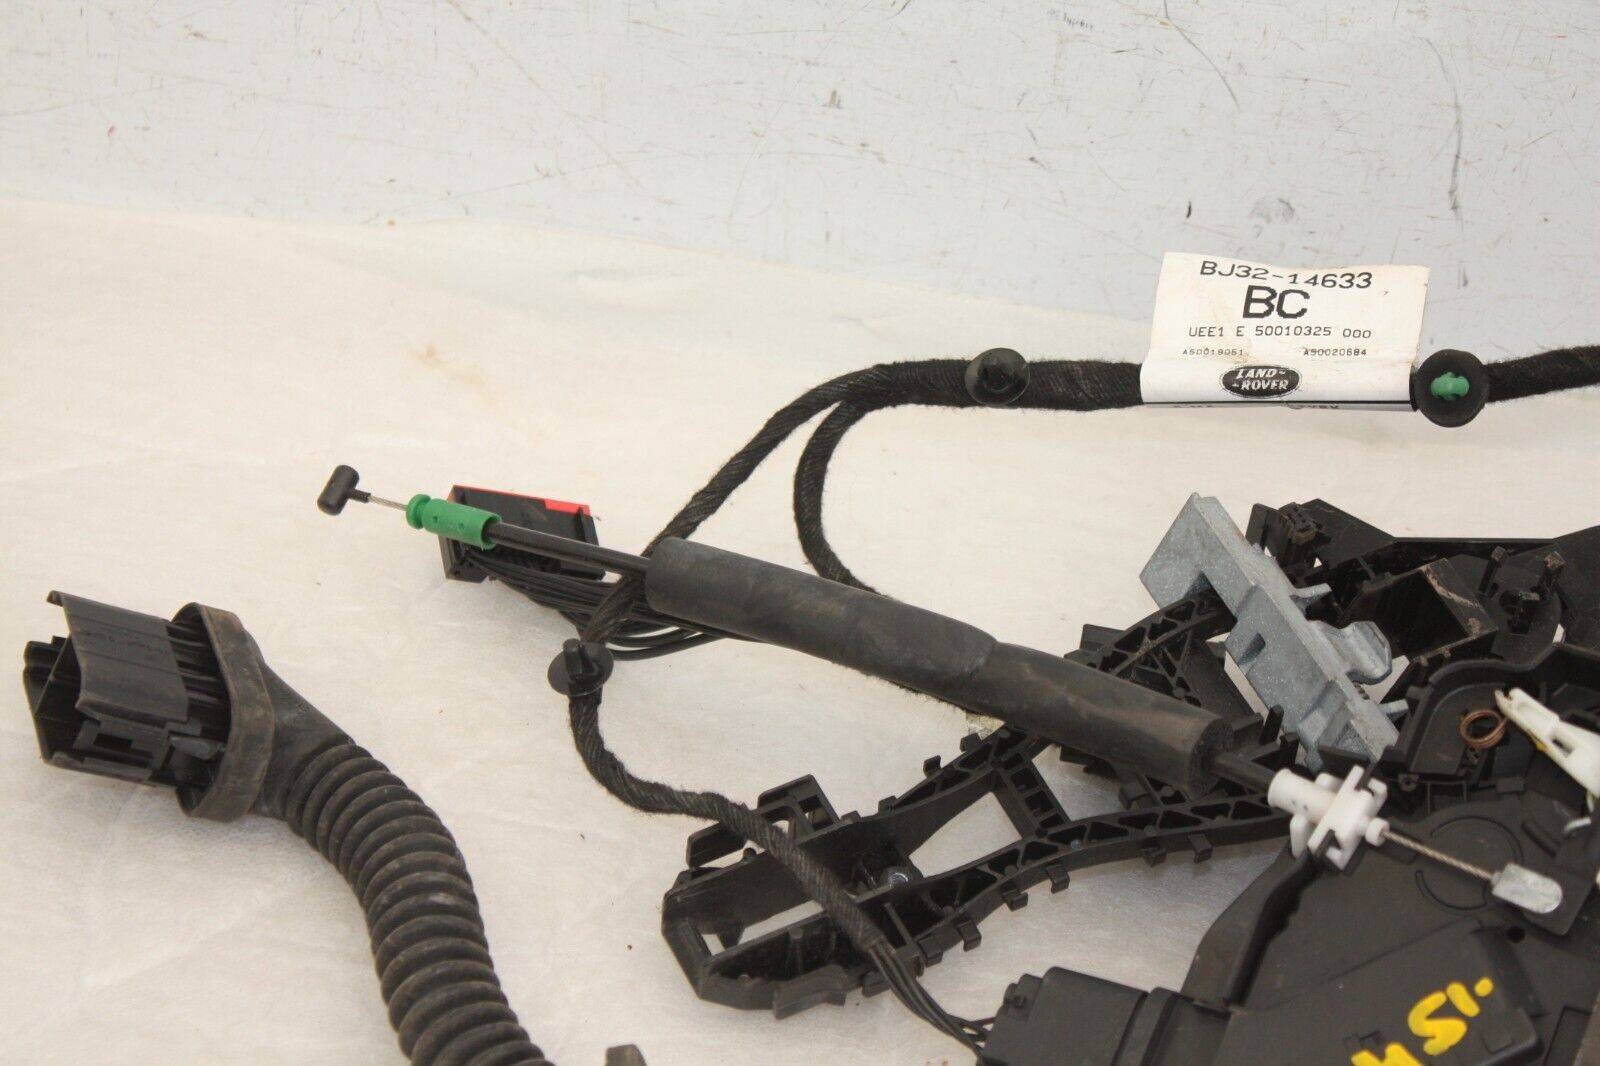 Range-Rover-Evoque-L538-Rear-Right-Door-Wiring-Loom-With-Motor-BJ32-14633-BC-176345734719-7